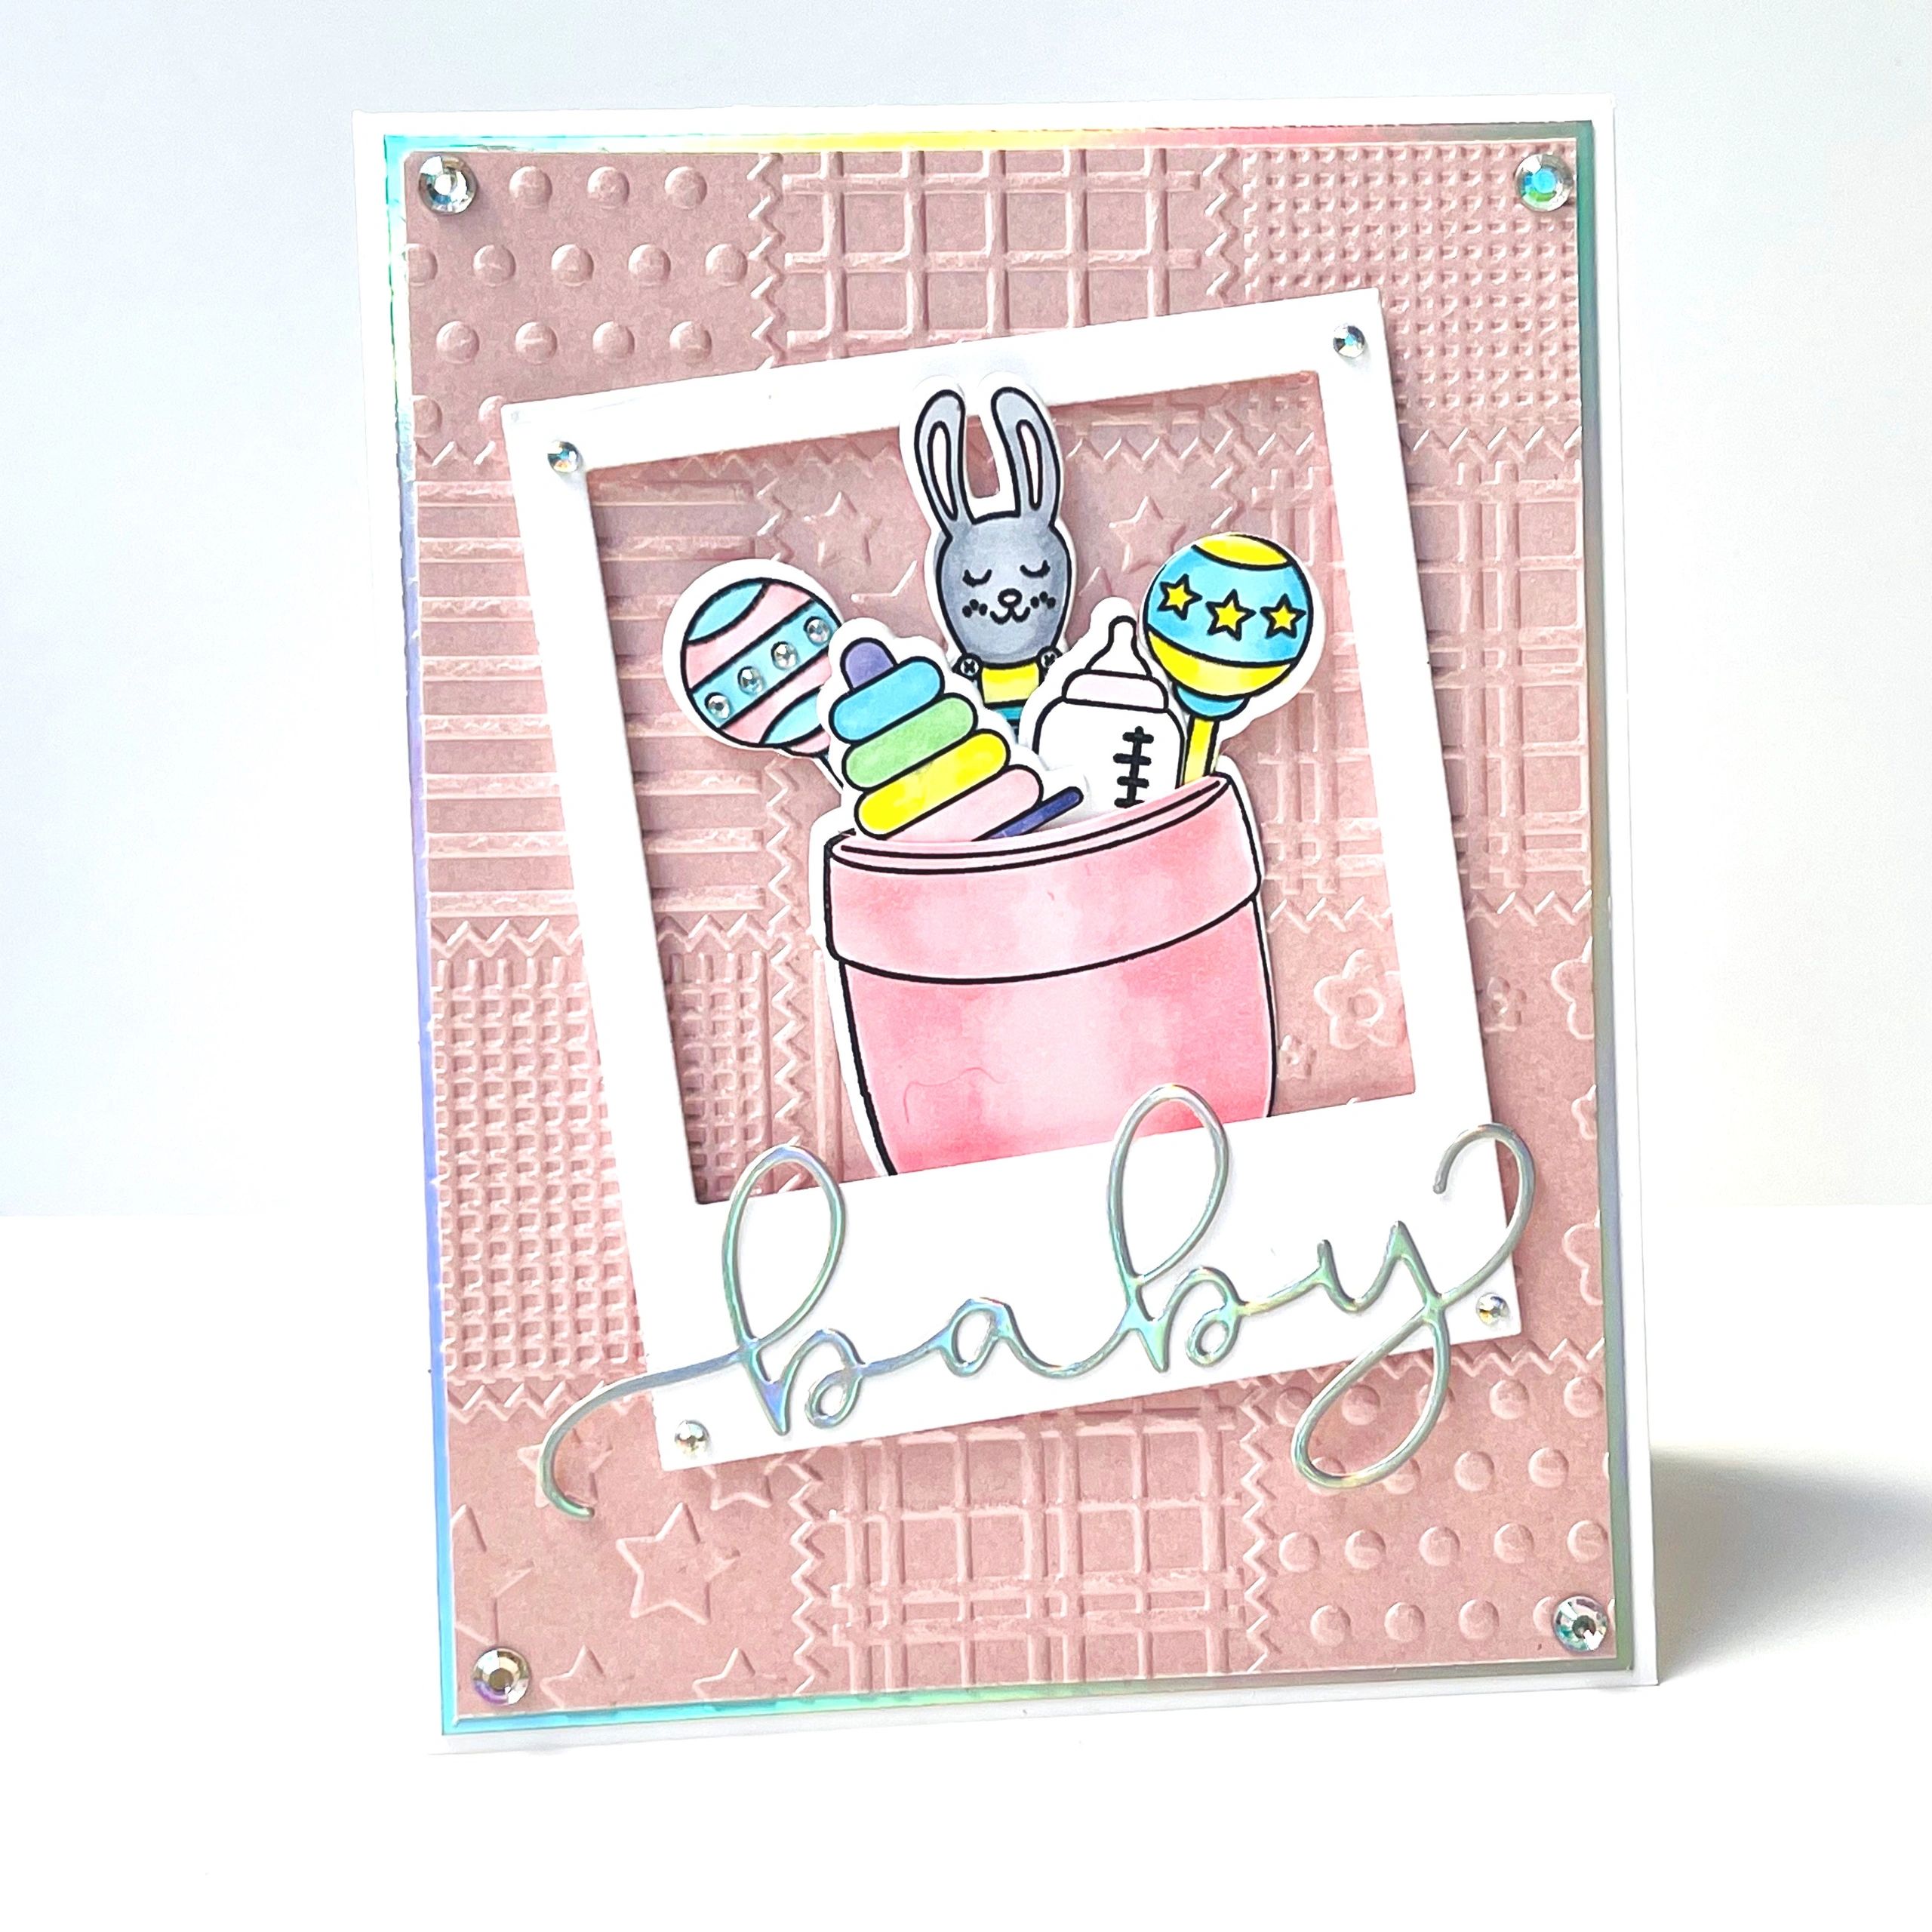 Diamond Press Stamp and Embossing Frames Card Making Kit